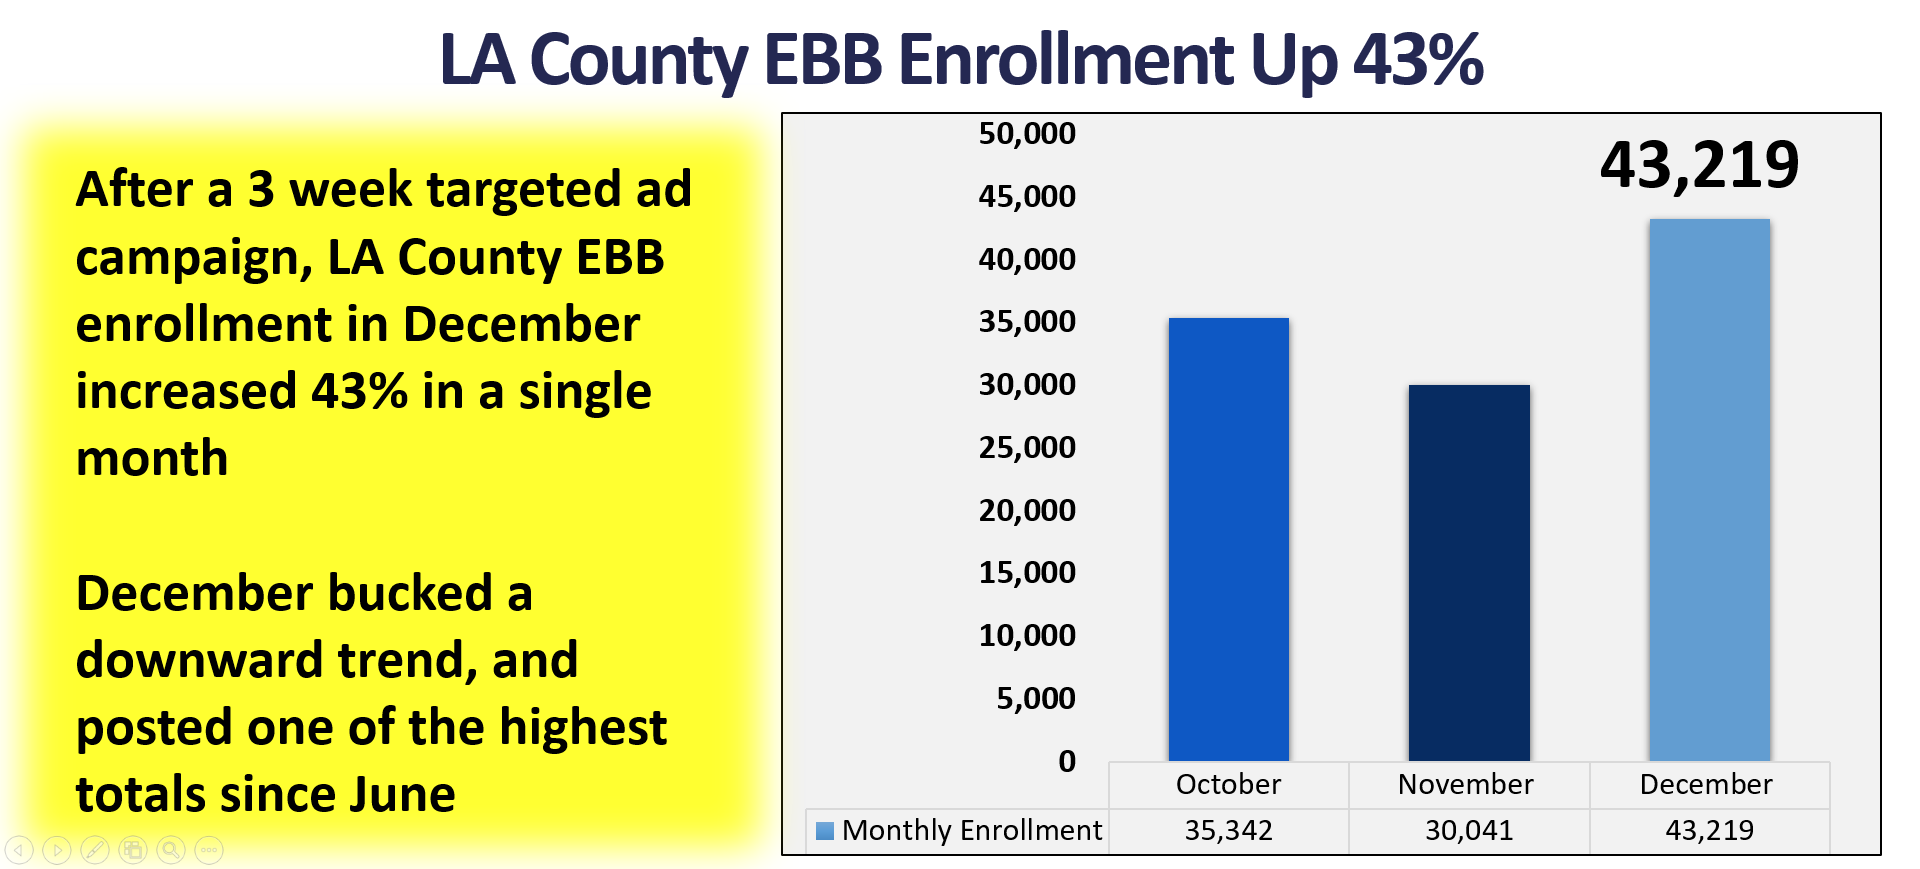 LA County EBB Enrollment Up 43%. After a 3 week targeted as campaign, LA County EBB enrollment in December increased 43% in a single month. December bucked a downward trend, and posted one of the highest totals since June.